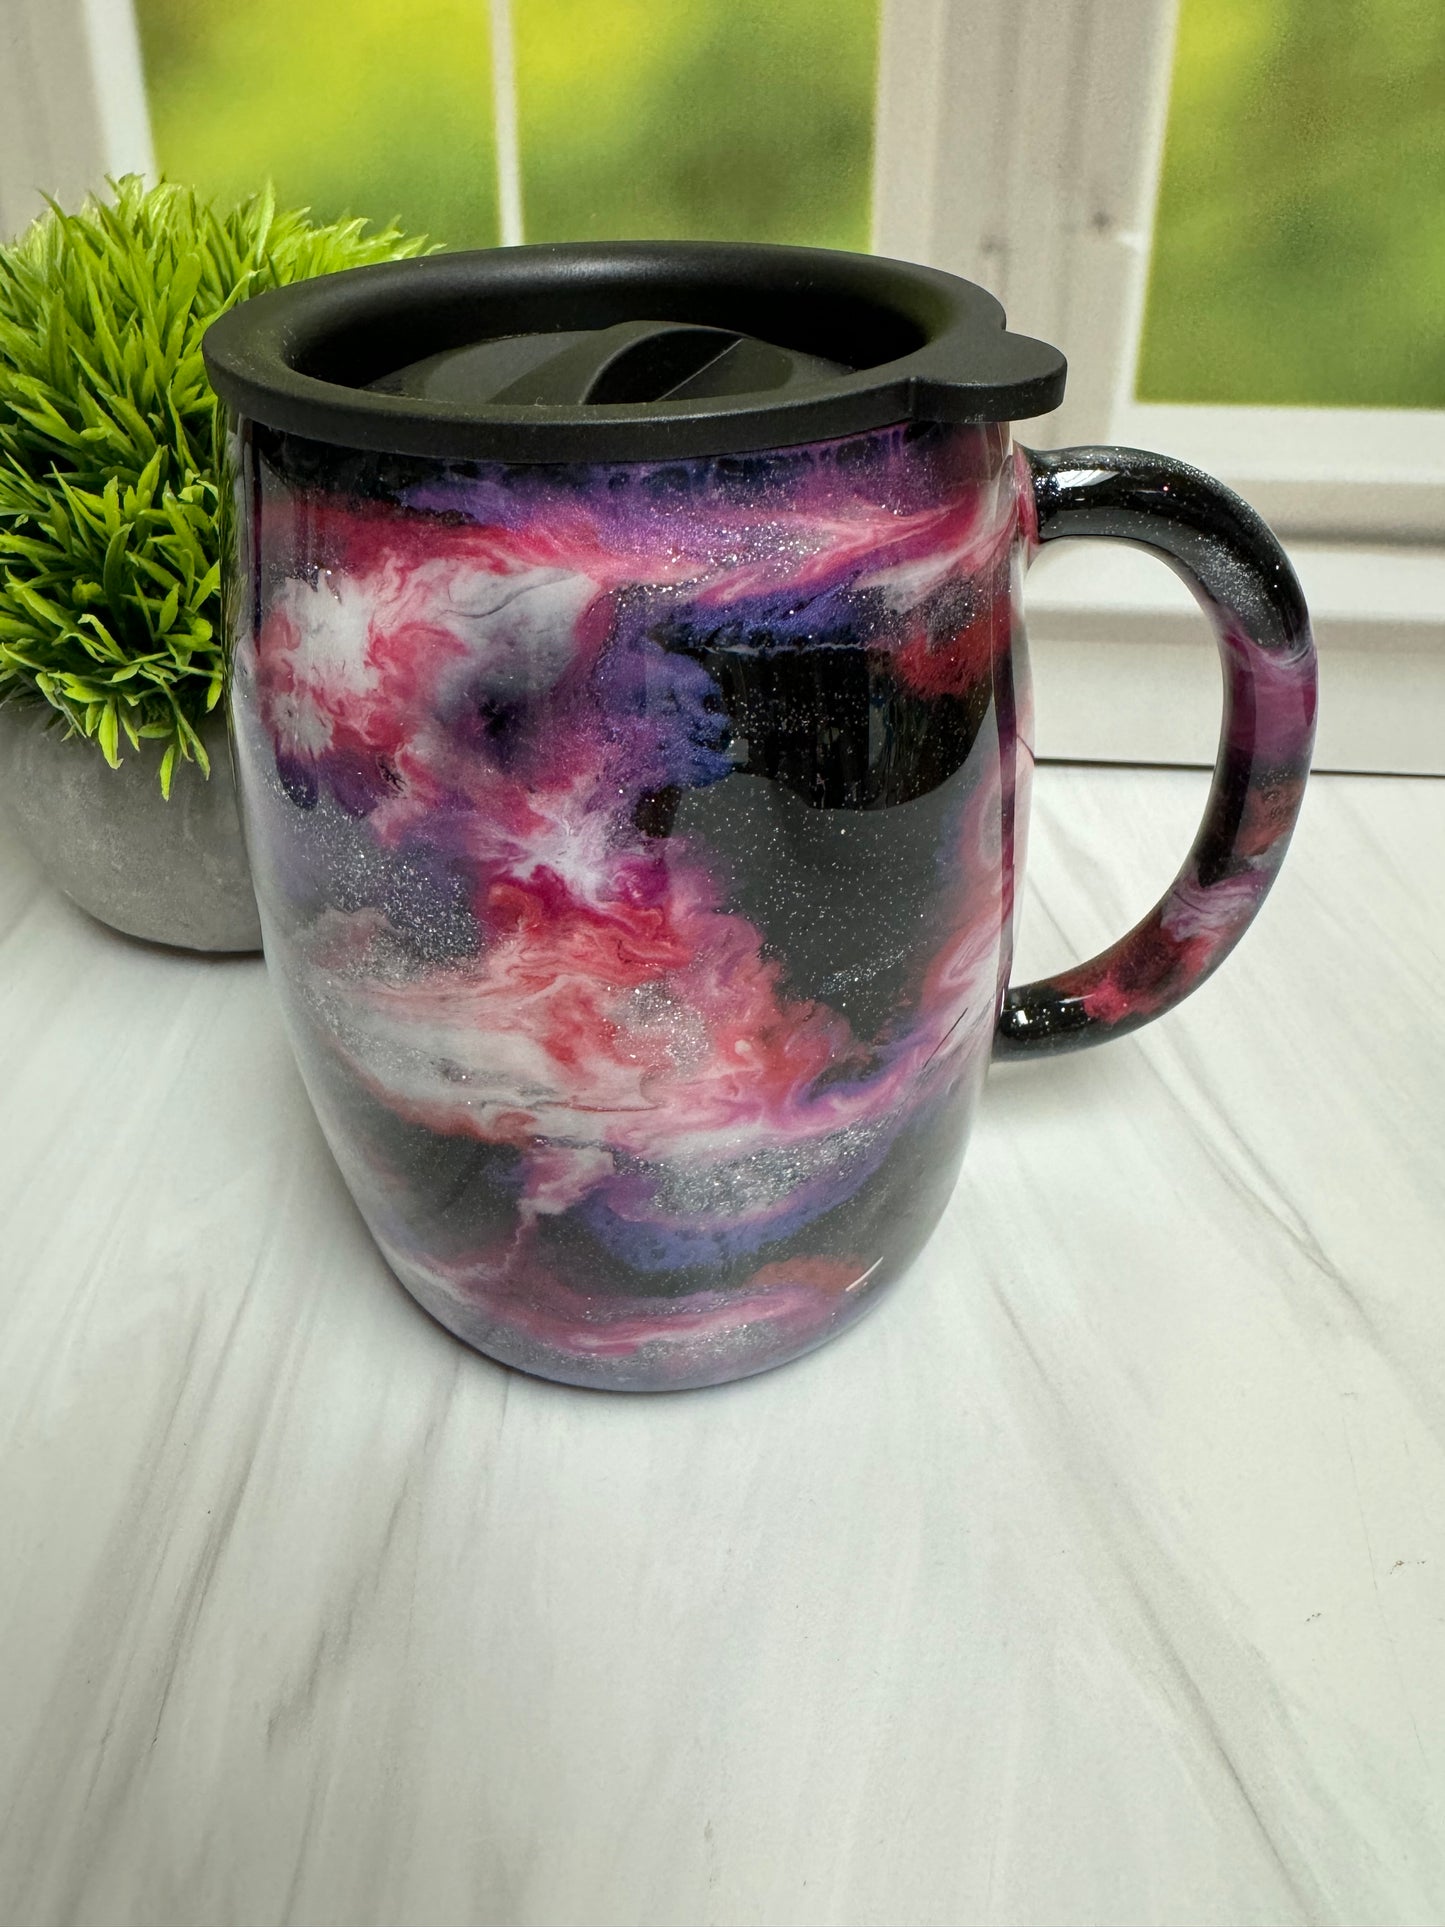 Stainless Steel Coffee Mug - black with pink purple and silver swirls - 14 oz